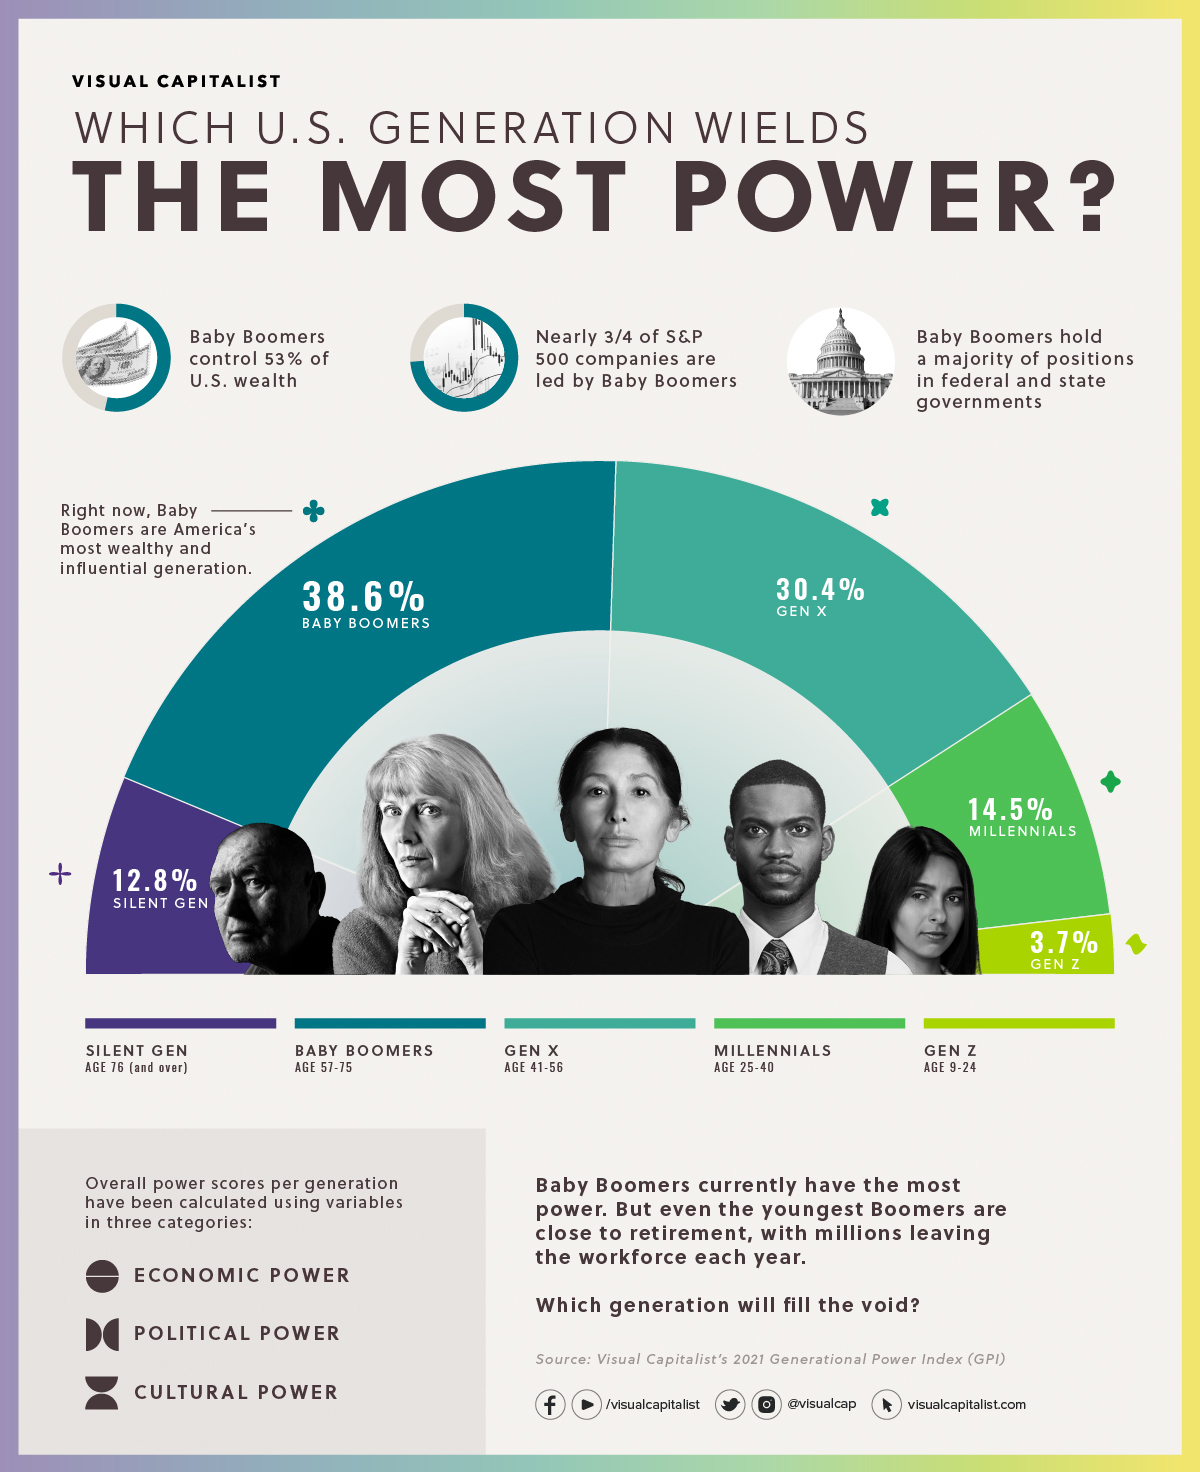 Which U.S. Generation has the Most Power and Influence?